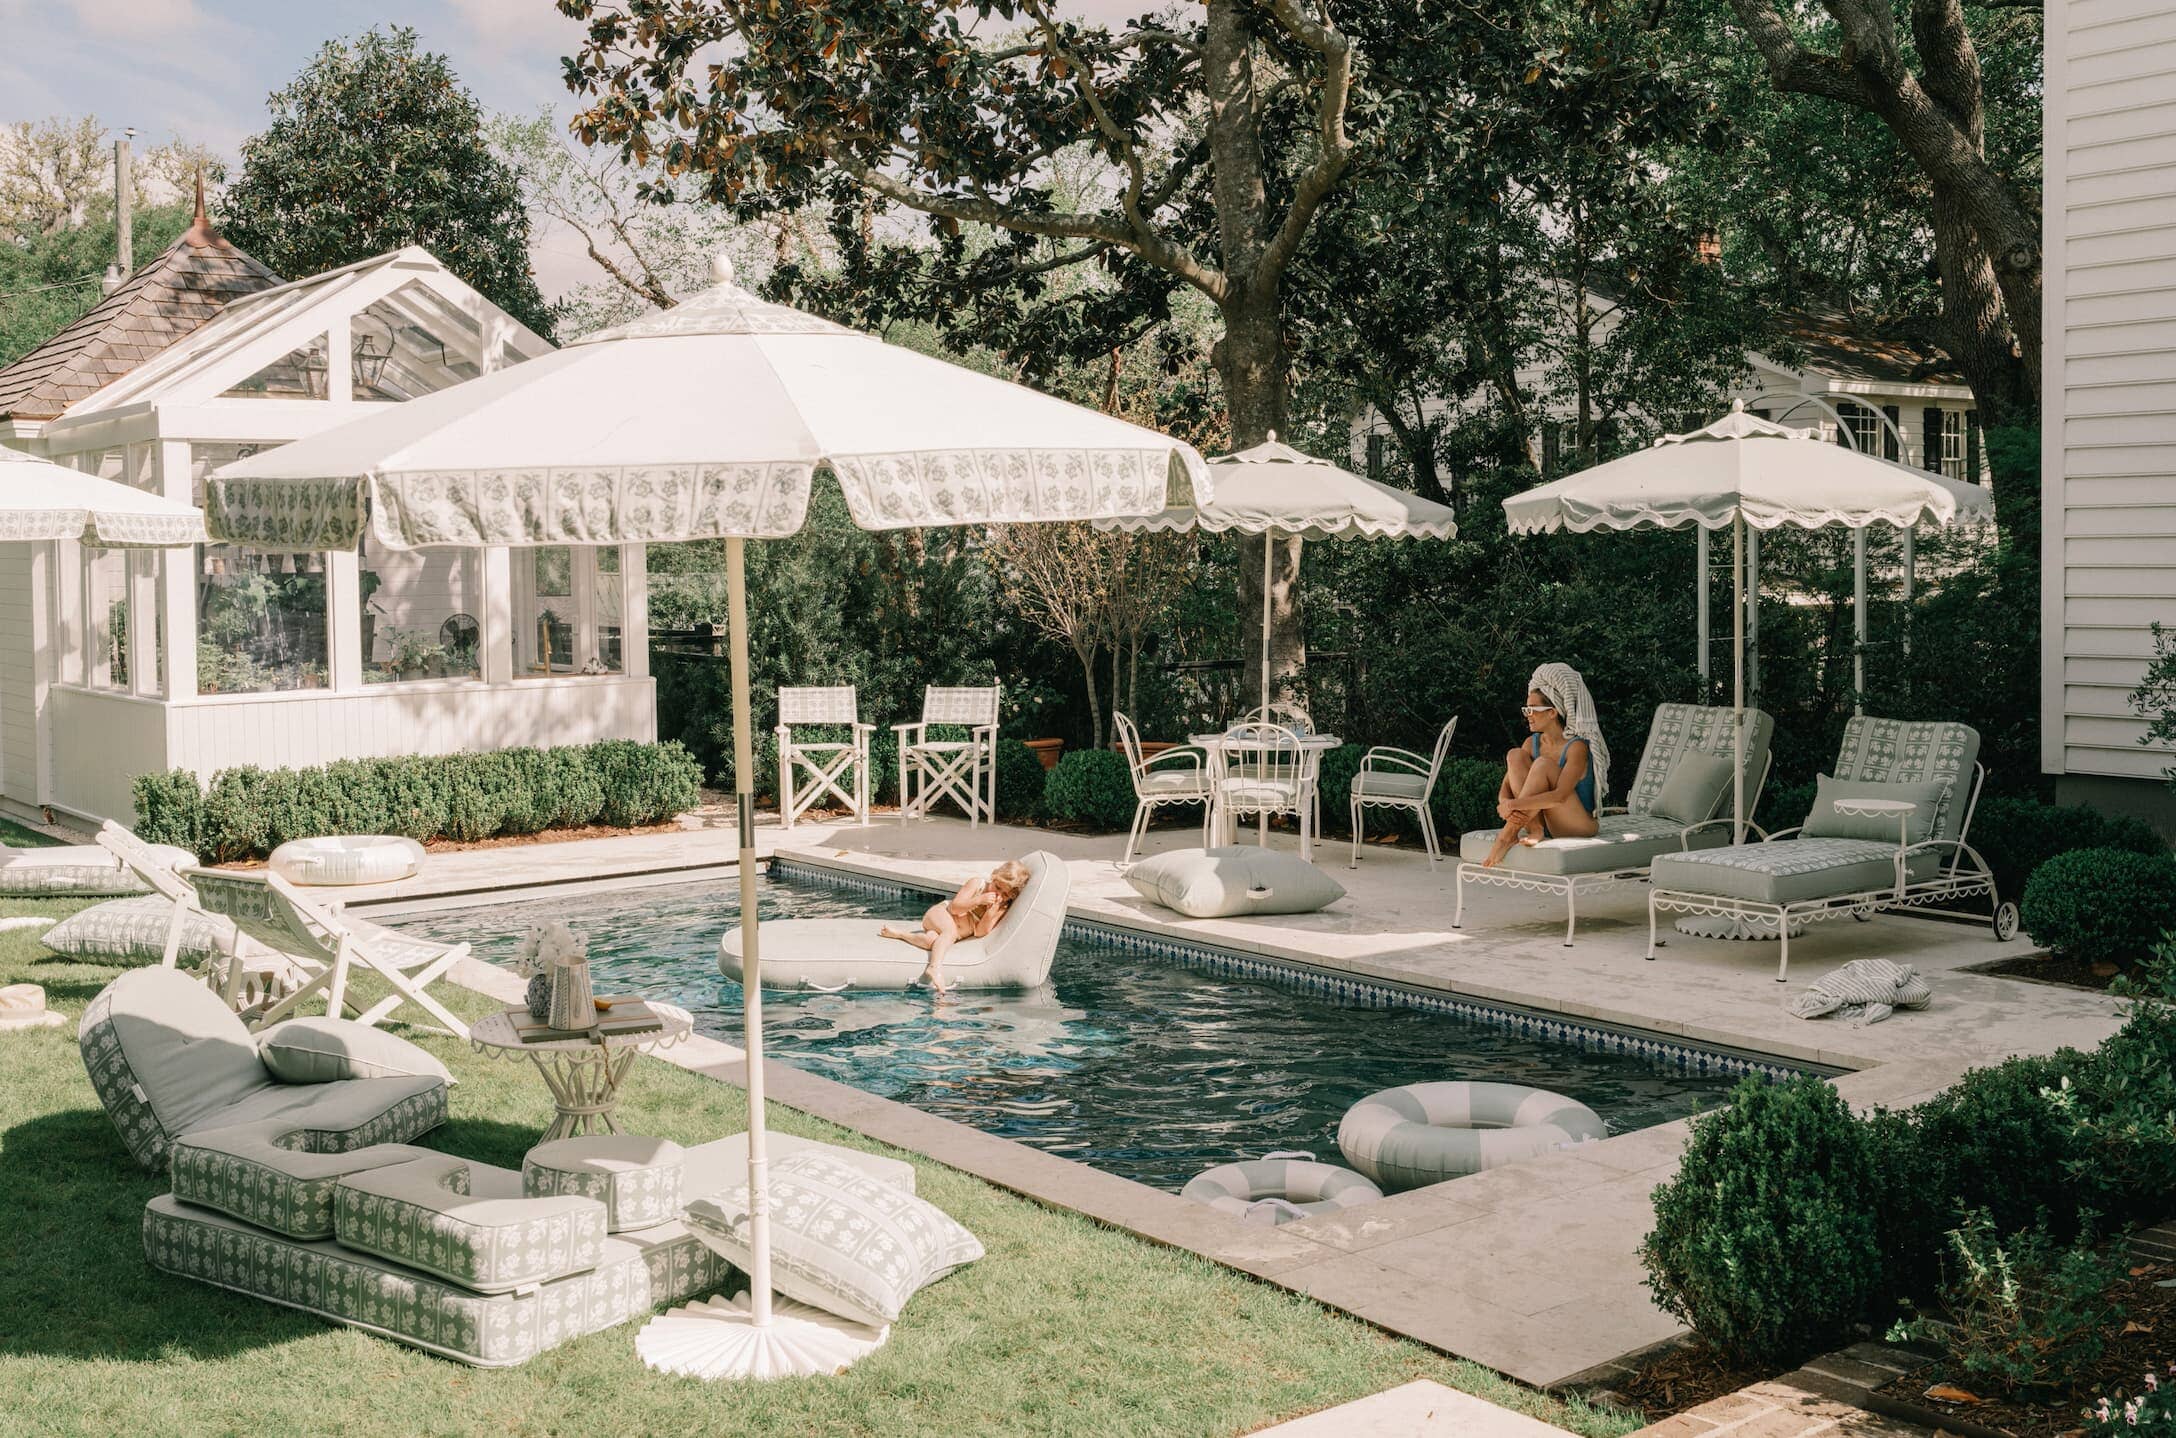 Outdoor pool area with umbrellas, chairs and outdoor cushions